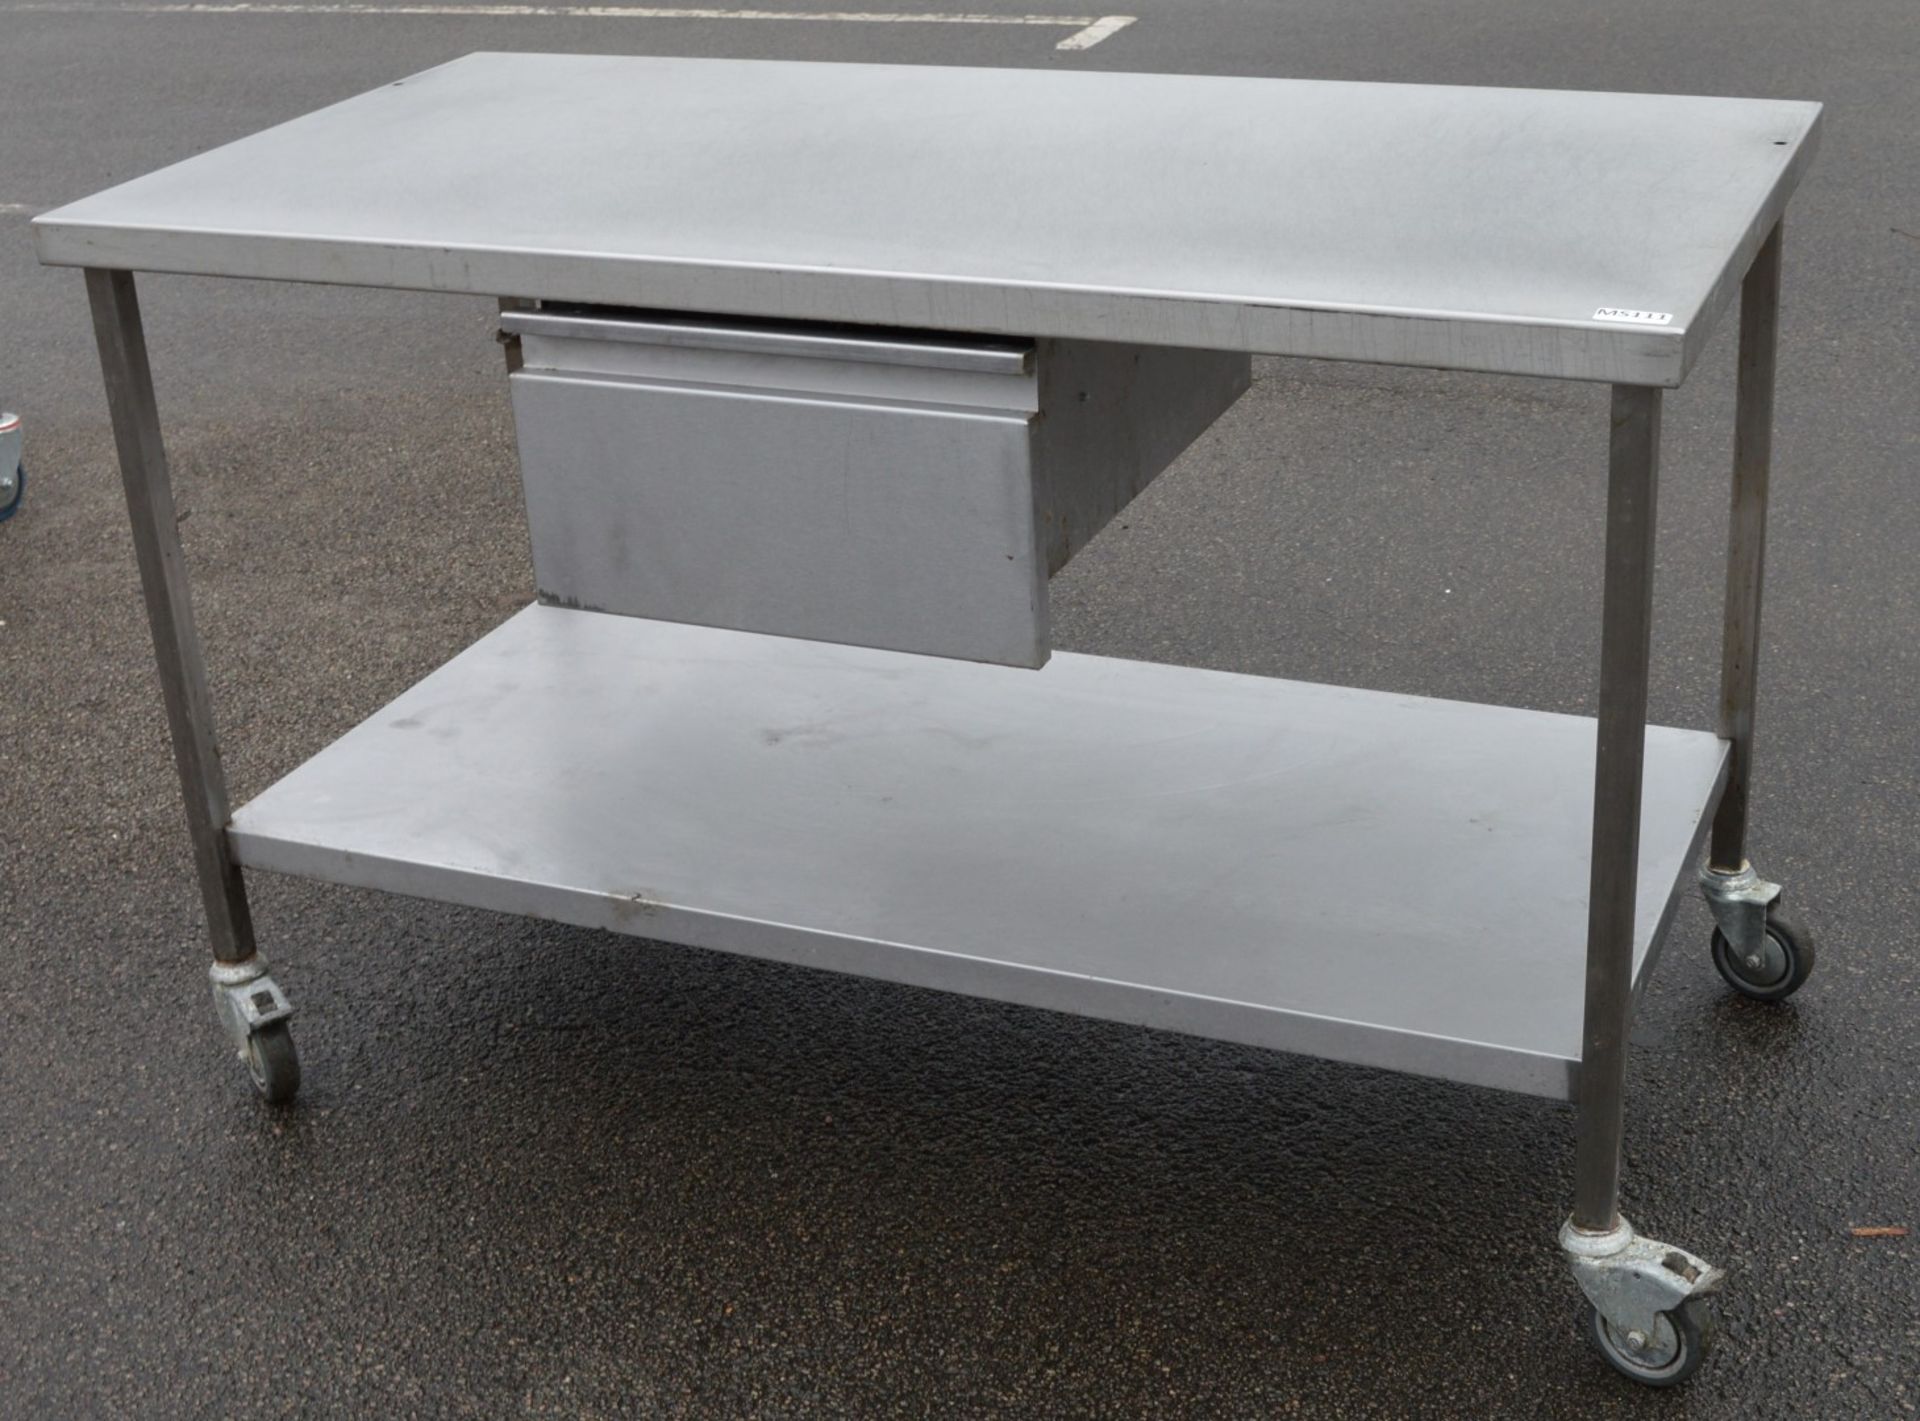 1 x Stainless Steel Prep Bench With Undershelf, Castor Wheels and Central Drawer - H87 x W140 x D7 - Image 4 of 5